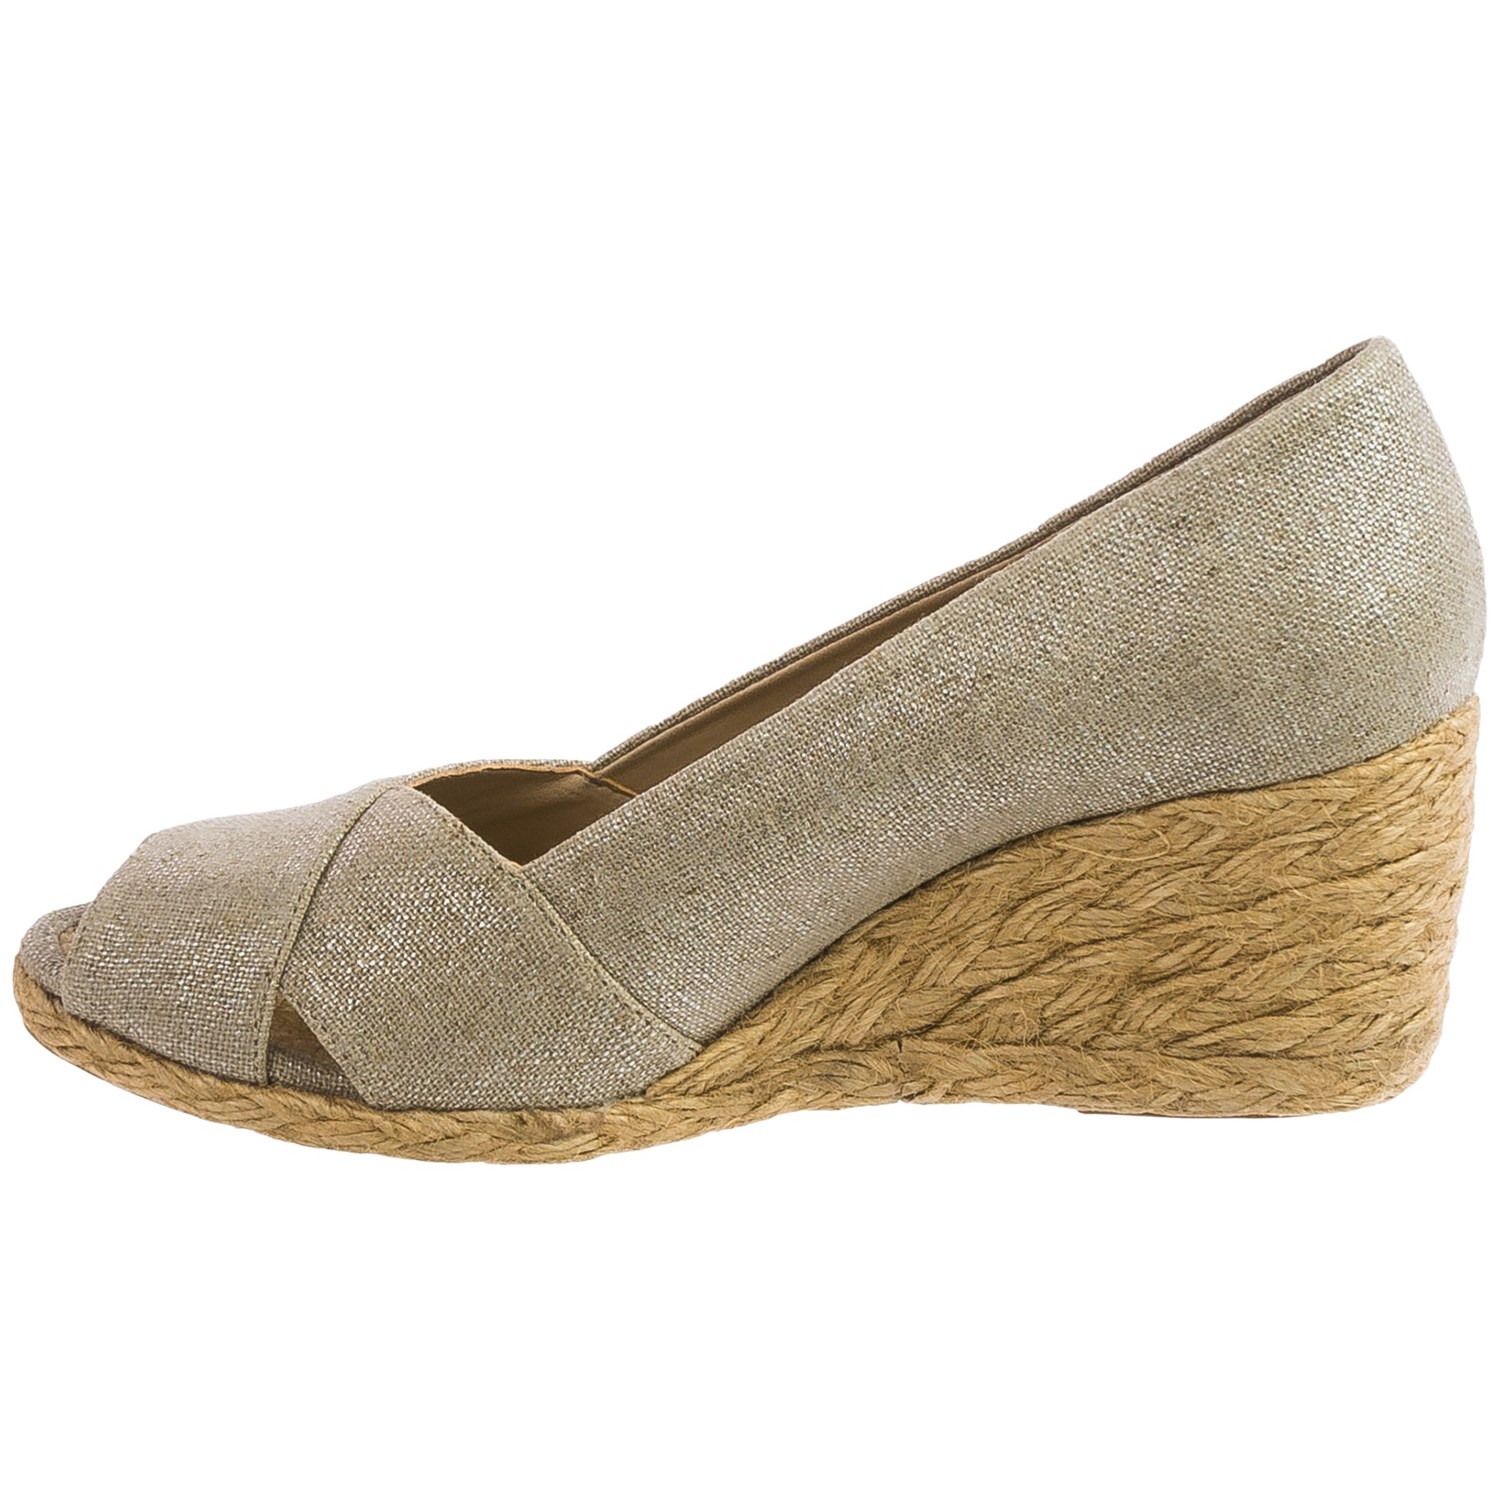 Adrienne Vittadini Bailee Wedge Shoes (For Women) Save 68